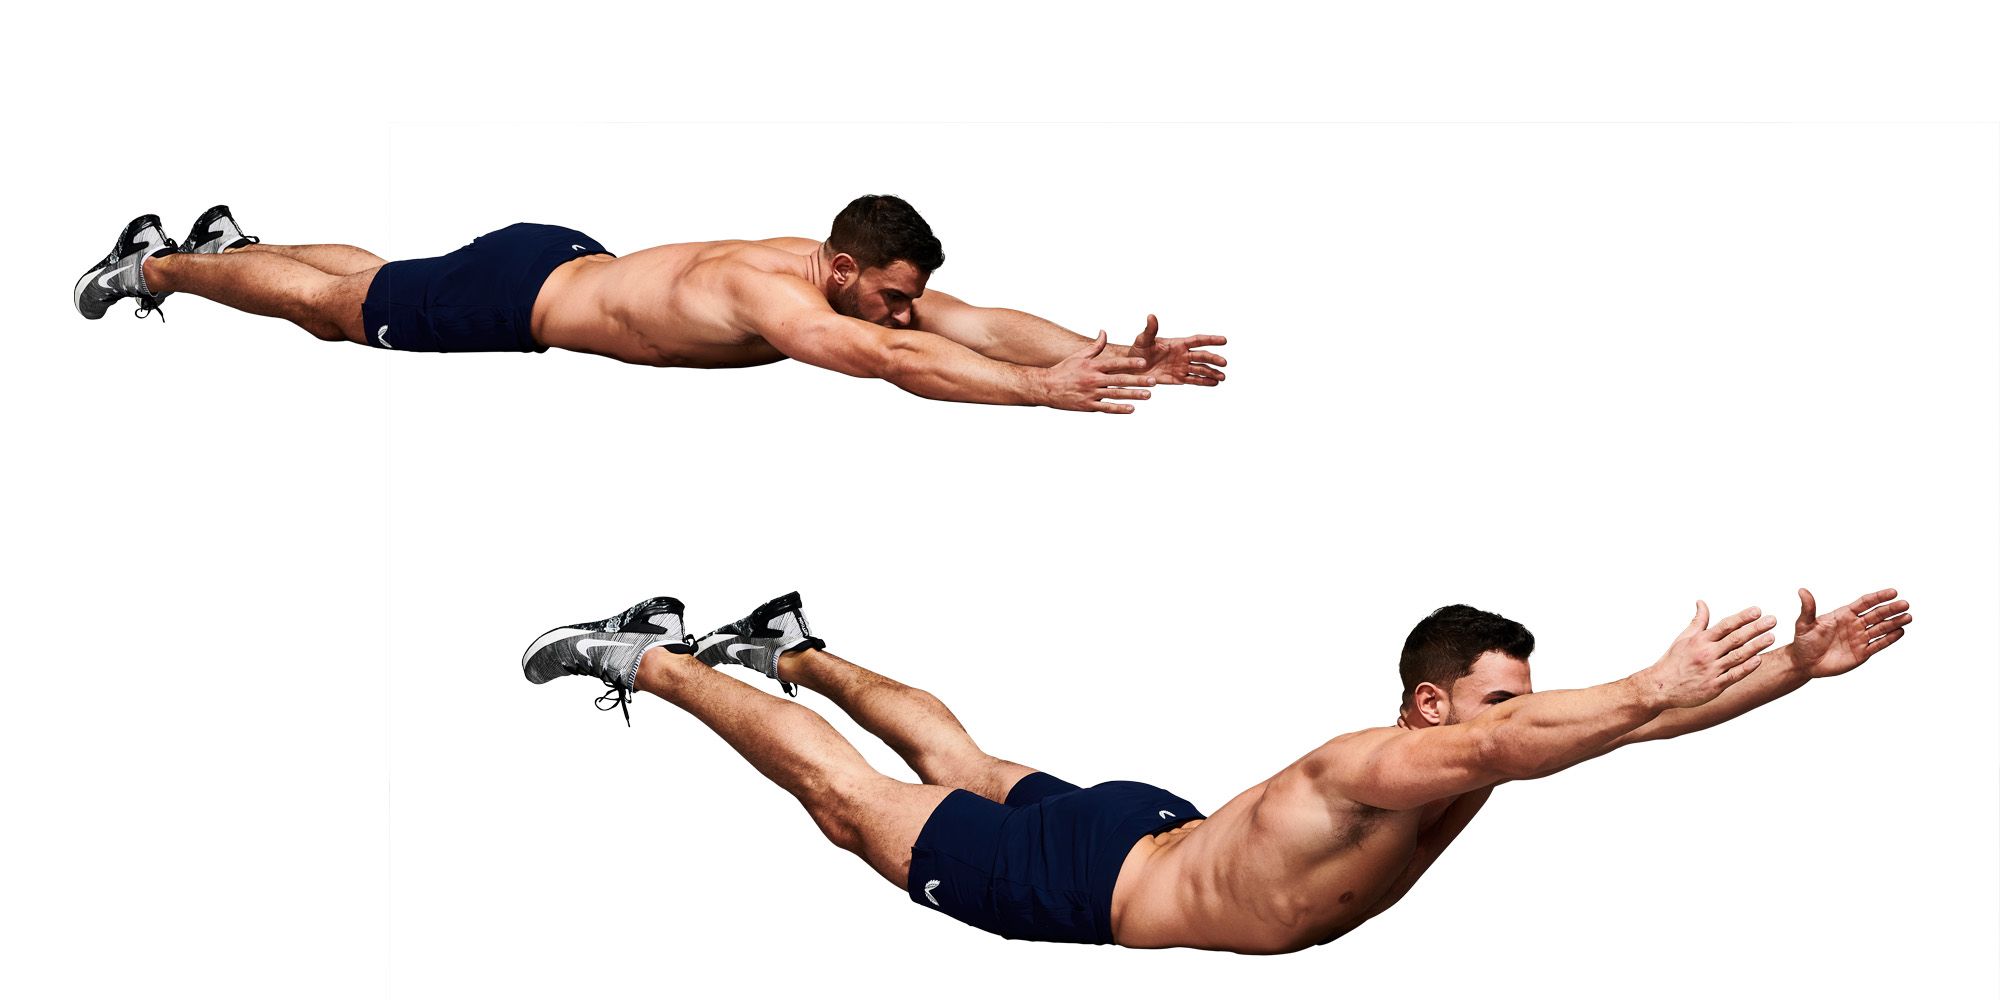 Defined lower back workout you can do from home, all you need is dumbb